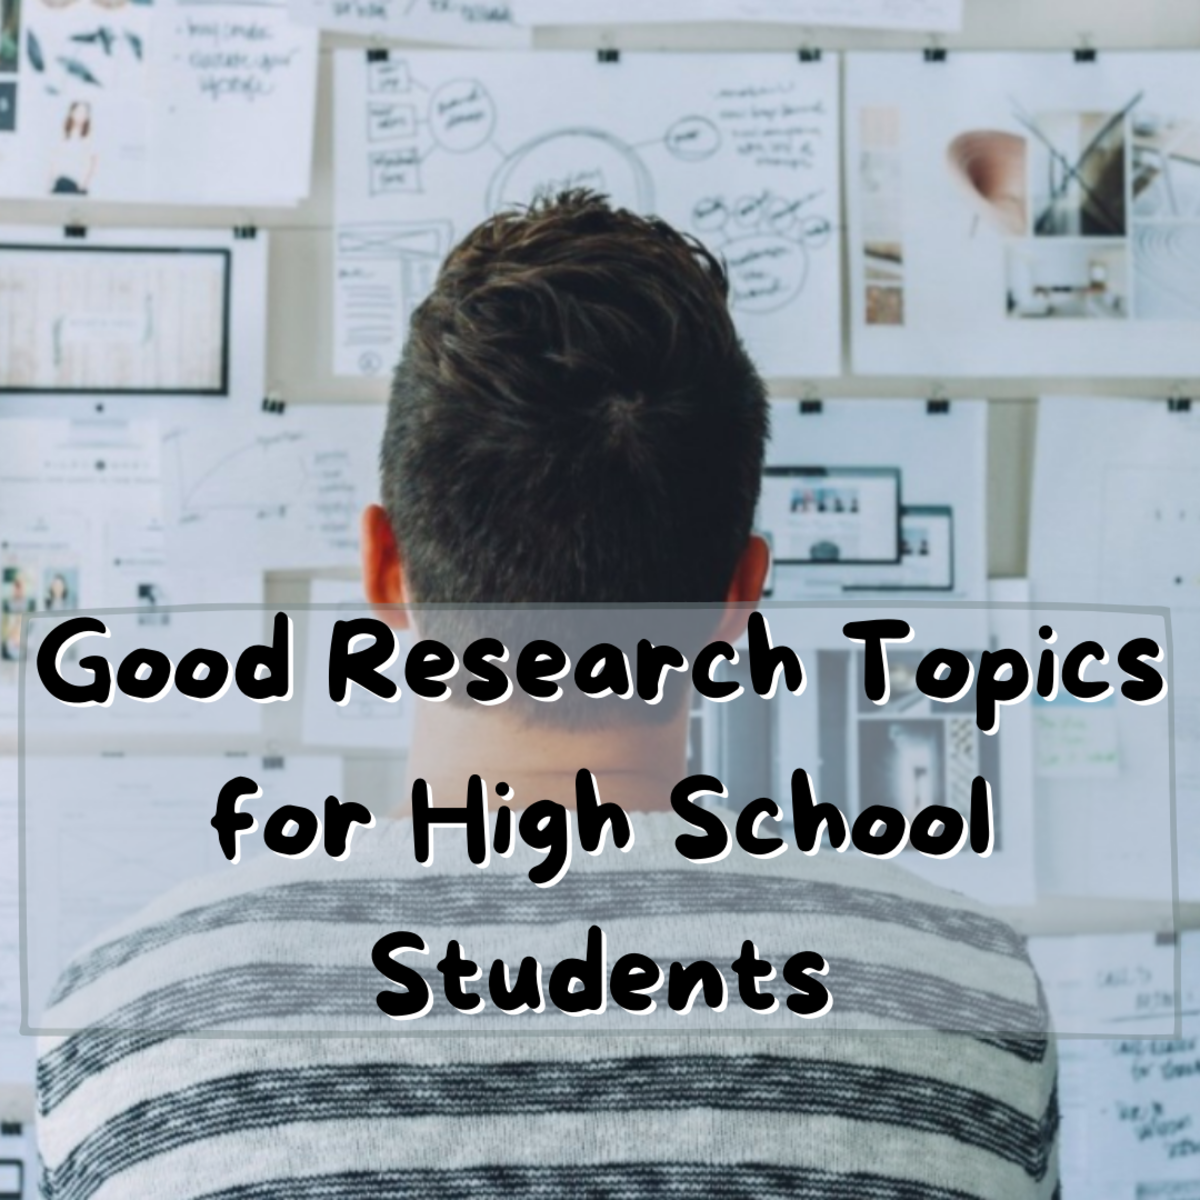 It can seem confusing to find a good research topic, but it doesn't have to be difficult.